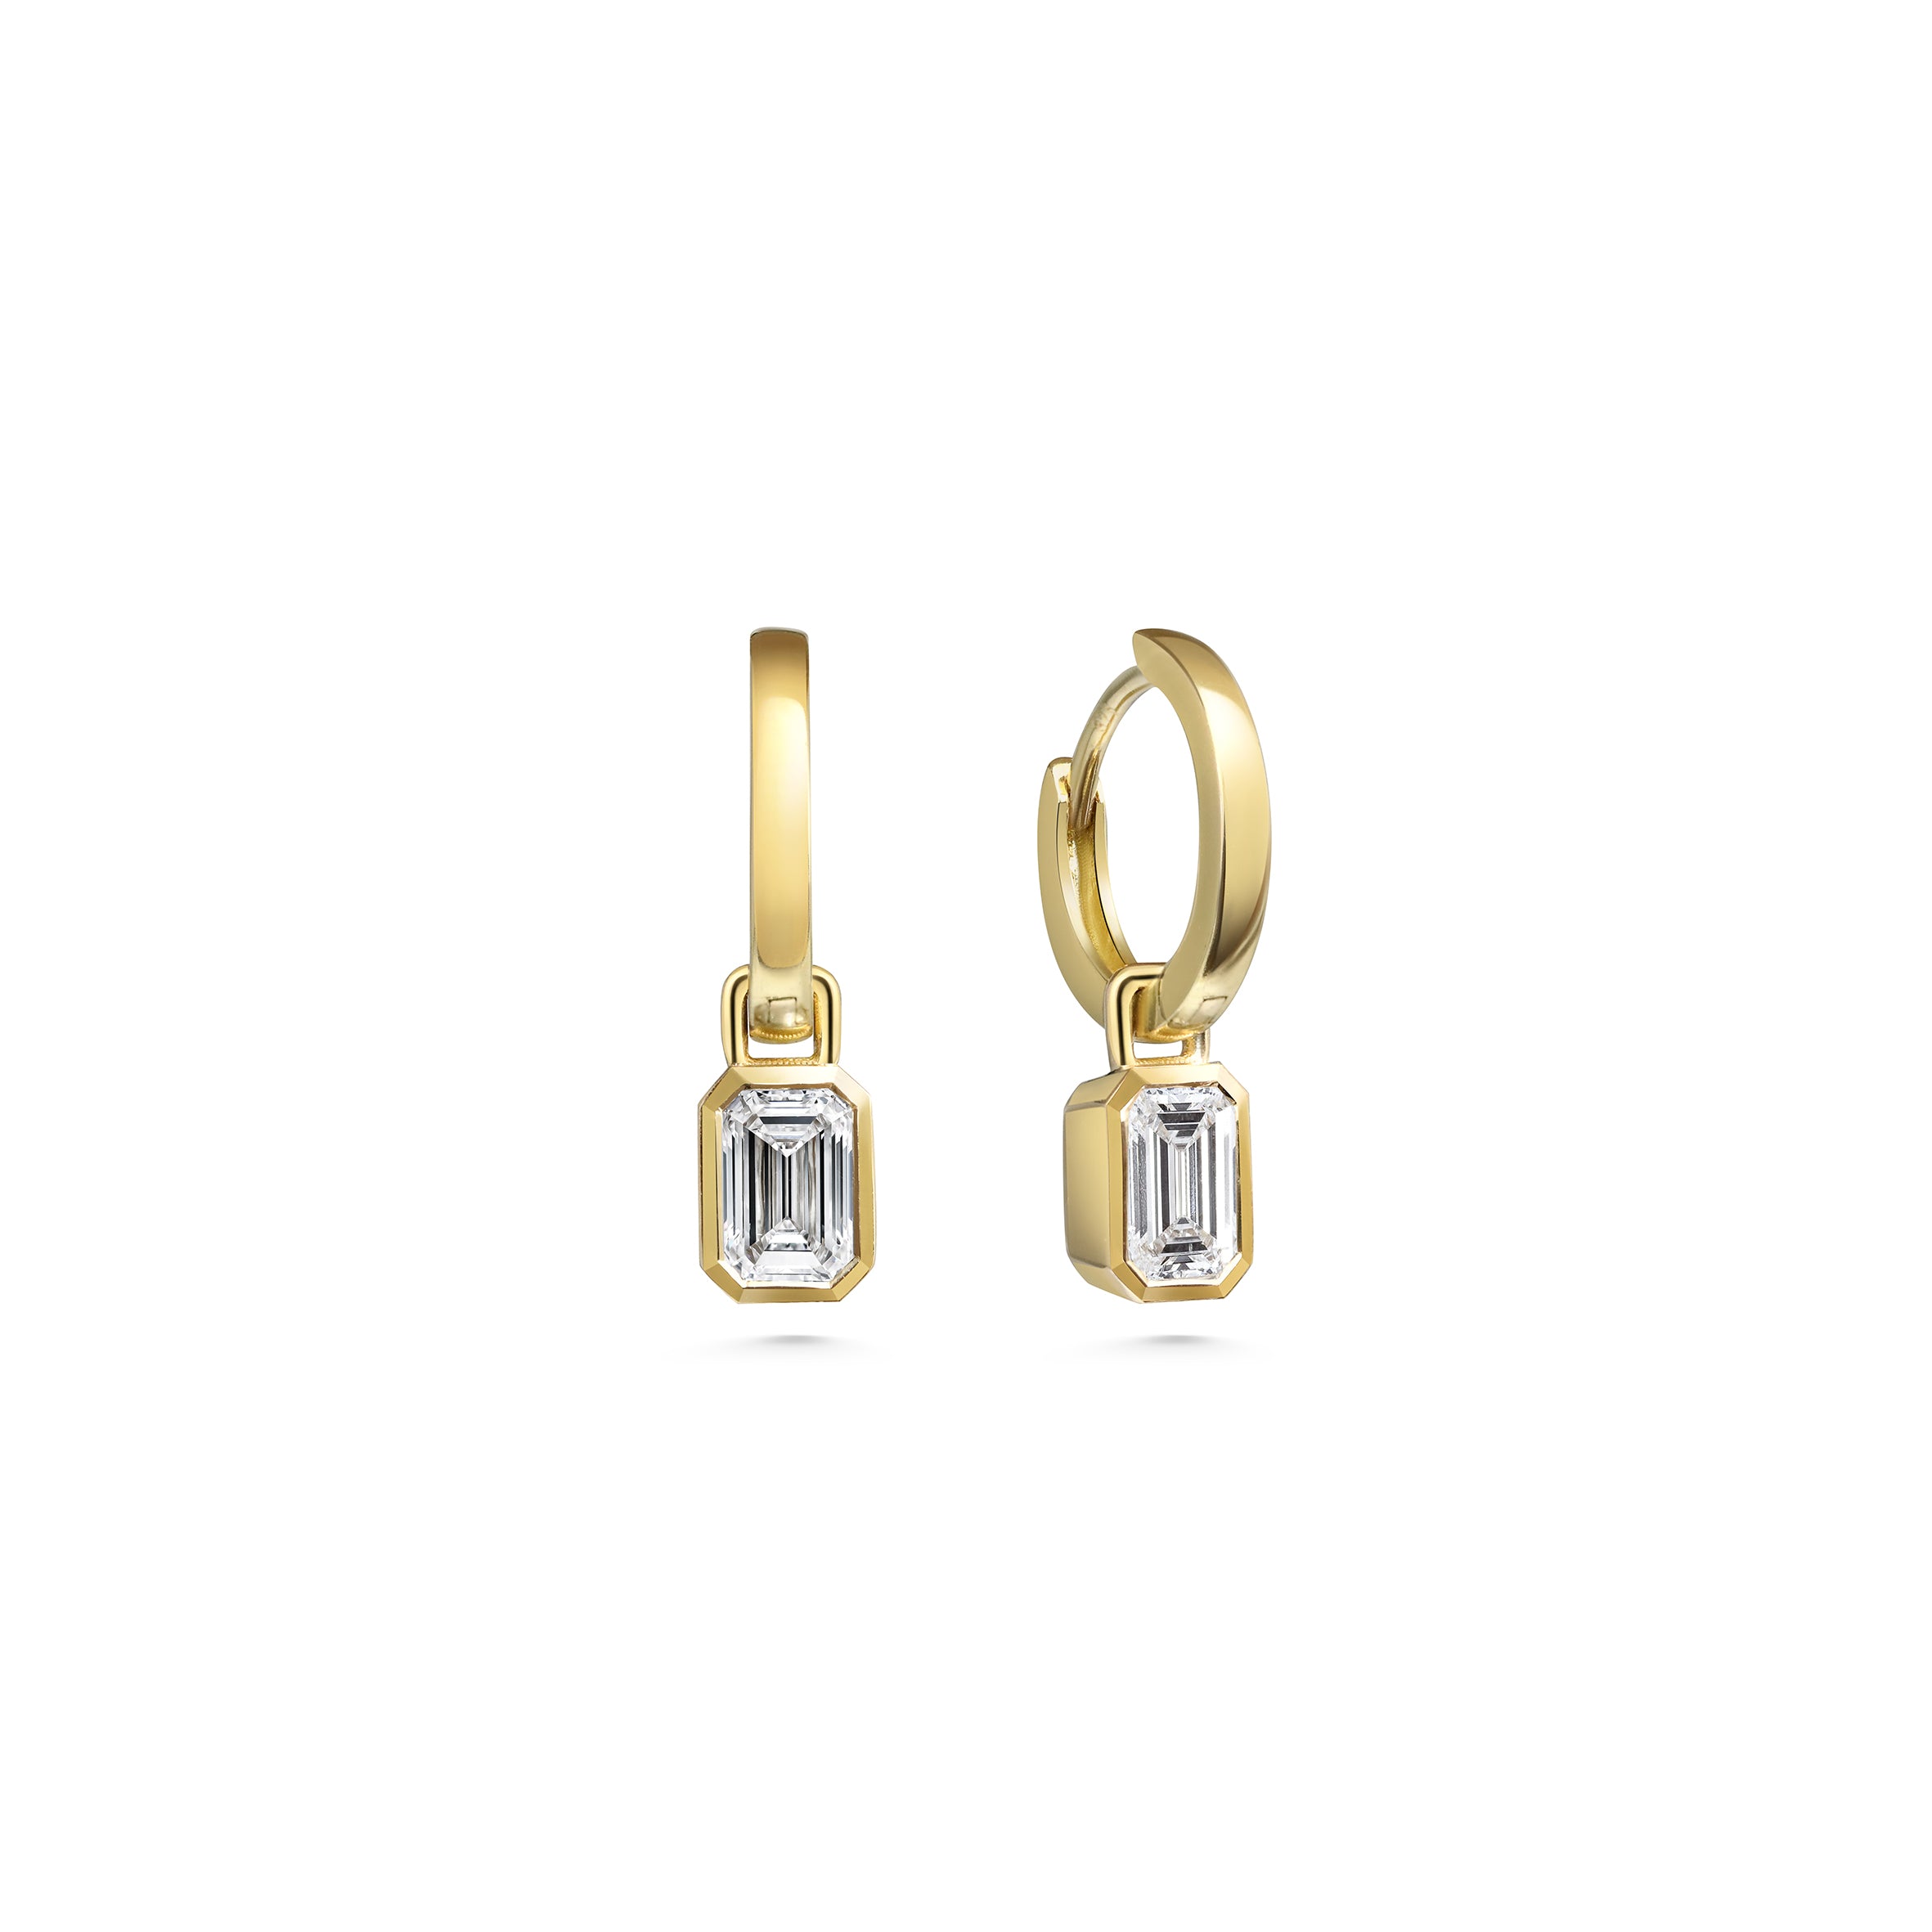 The Emerald Cut Chunky Dropper Earrings by East London jeweller Rachel Boston | Discover our collections of unique and timeless engagement rings, wedding rings, and modern fine jewellery.